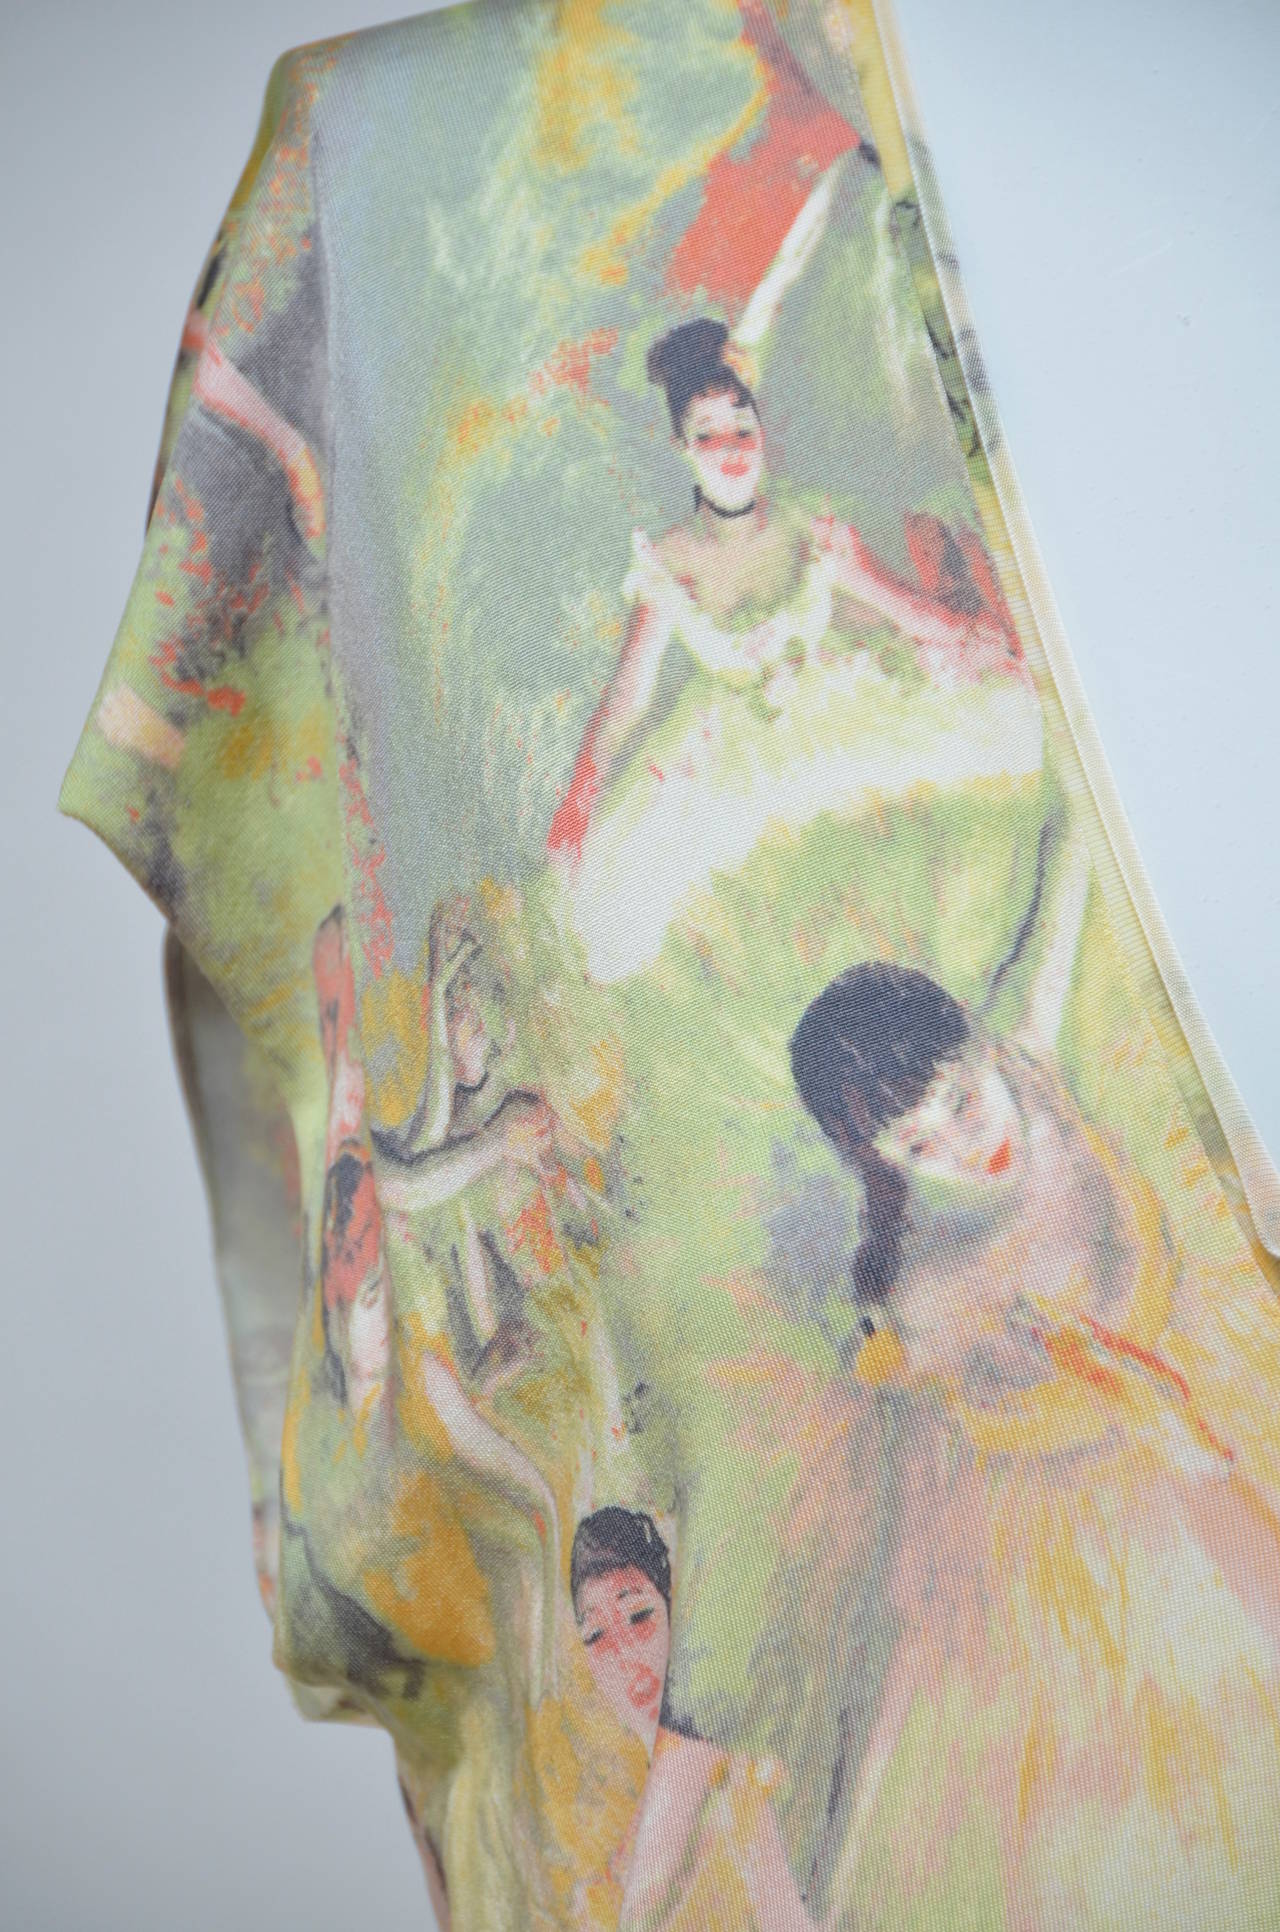 Jean Paul Gaultier Top .Ballerina print.Size L.
Made in Italy.
Excellent condition.
Final Sale.